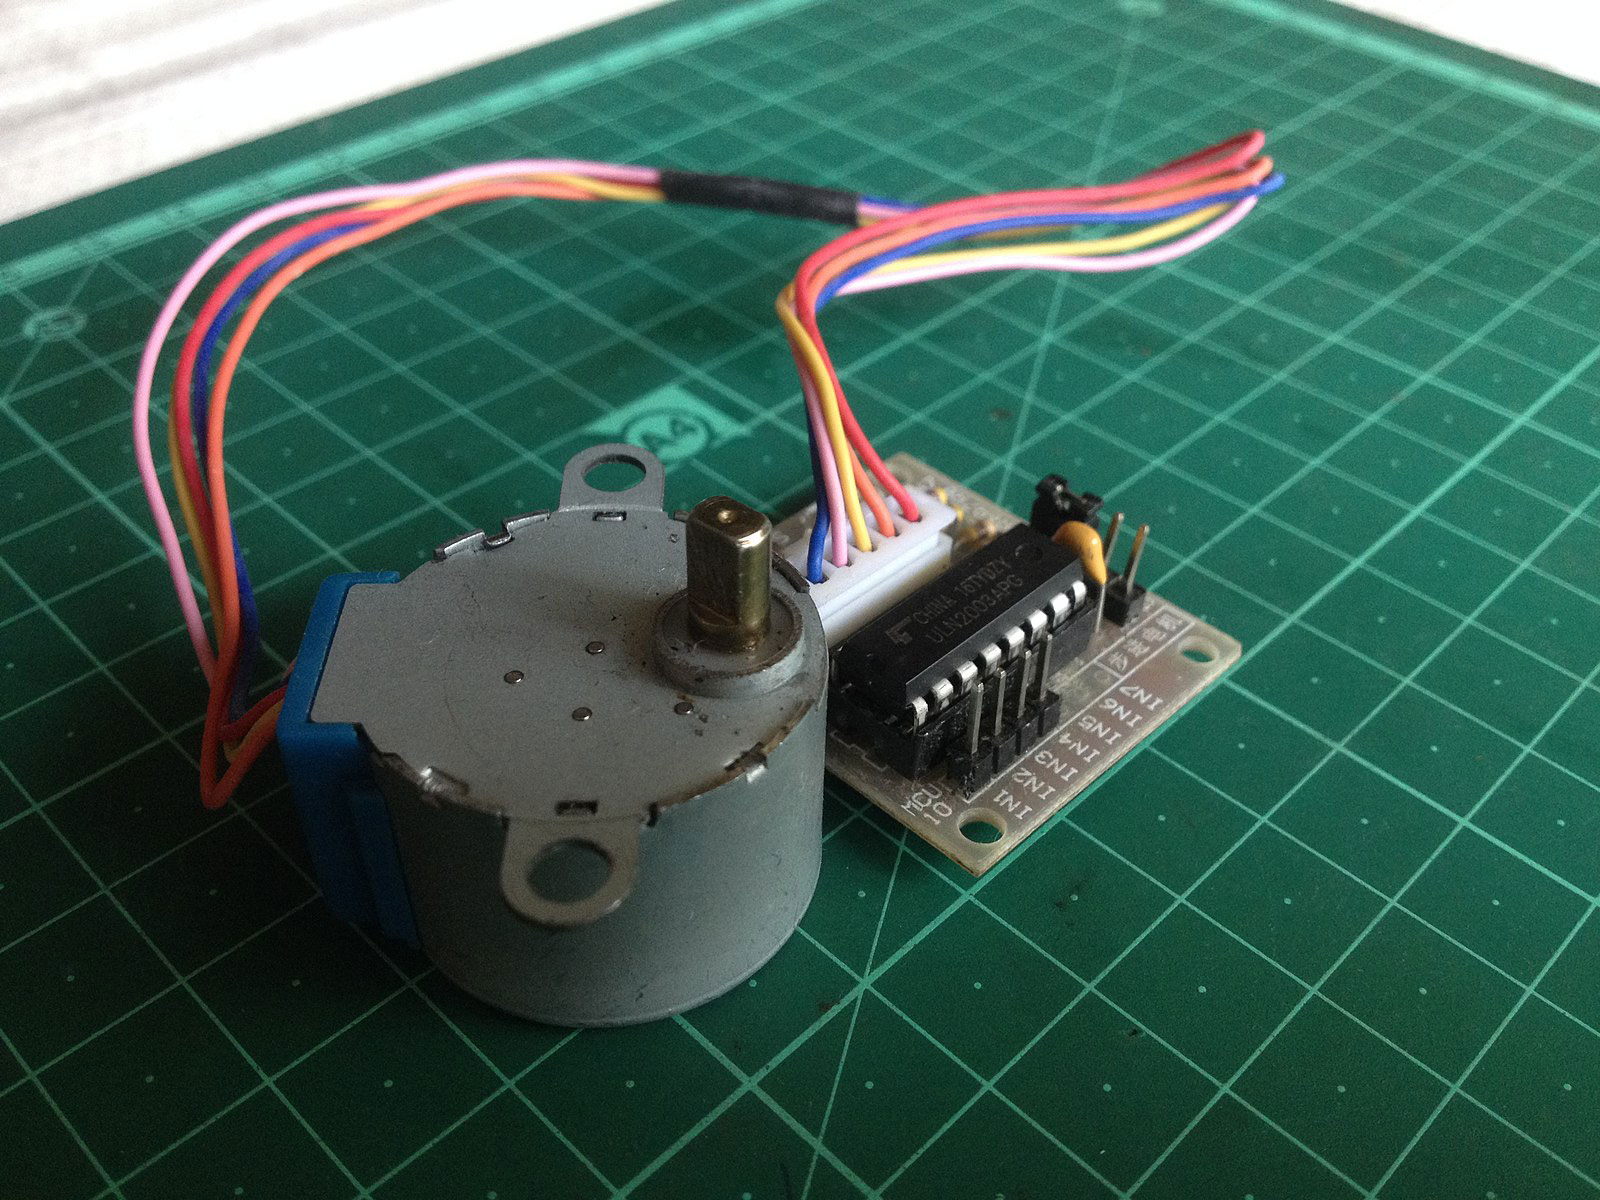 A 28BYJ-48 stepper motor with a ULN2003 driver